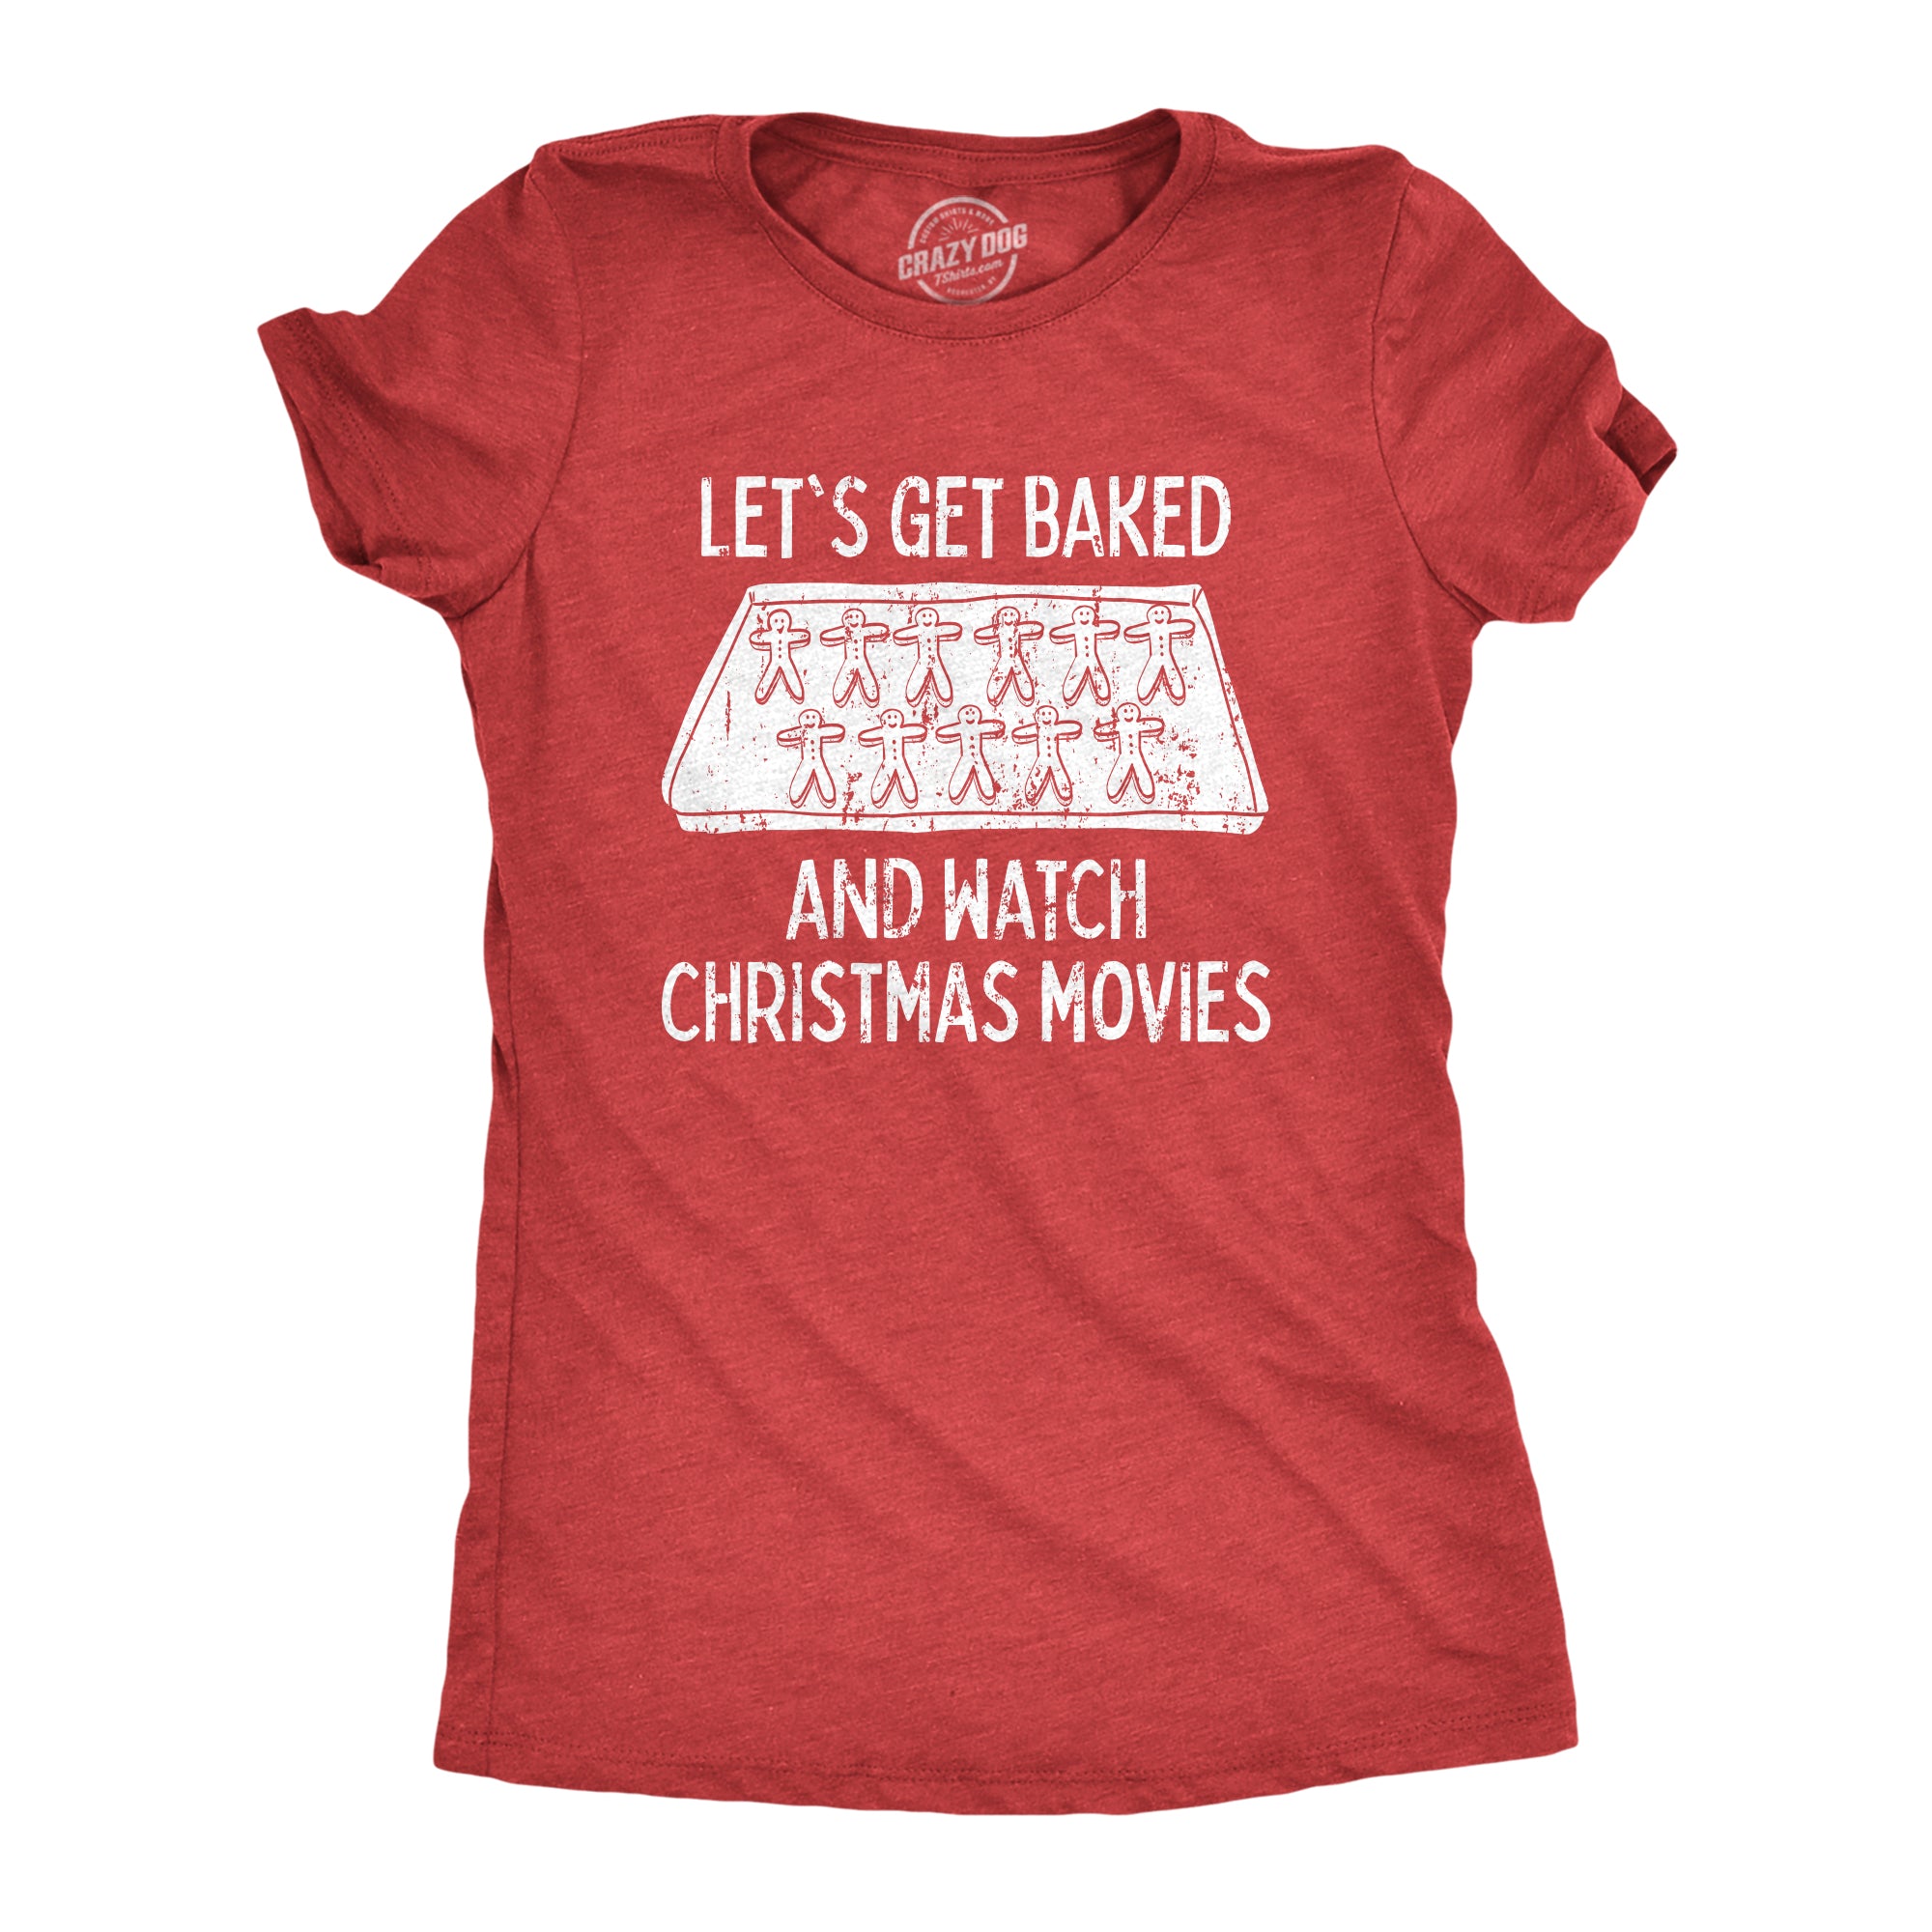 Funny Heather Red Let's Get Baked And Watch Christmas Movies Womens T Shirt Nerdy Christmas 420 Food Tee